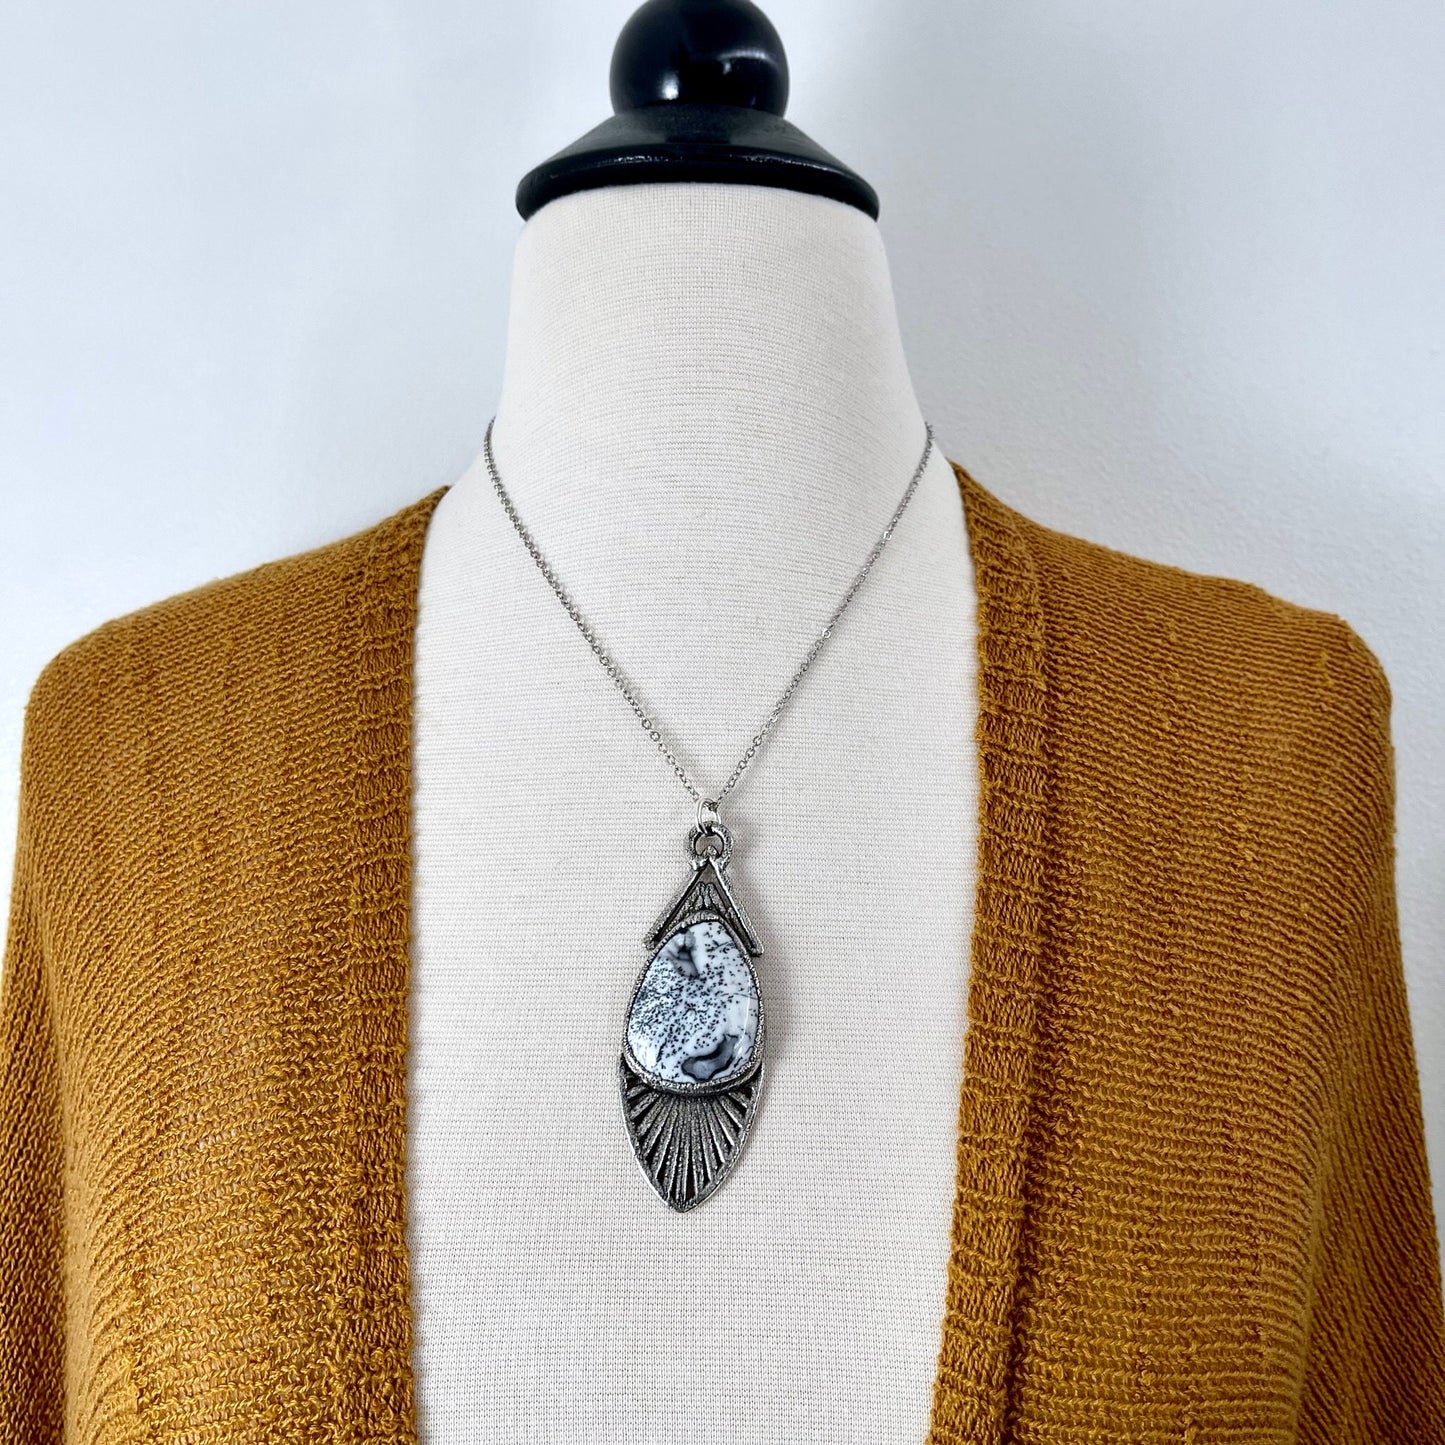 Big Crystal Necklace, Big Stone Necklace, Bohemian Jewelry, Crystal Necklaces, Etsy ID: 1556757320, Foxlark Alchemy, FOXLARK- NECKLACES, Gothic Jewelry, Jewelry, Large Crystal, Large Raw Crystal, layering necklace, Necklaces, Raw crystal jewelry, raw crys